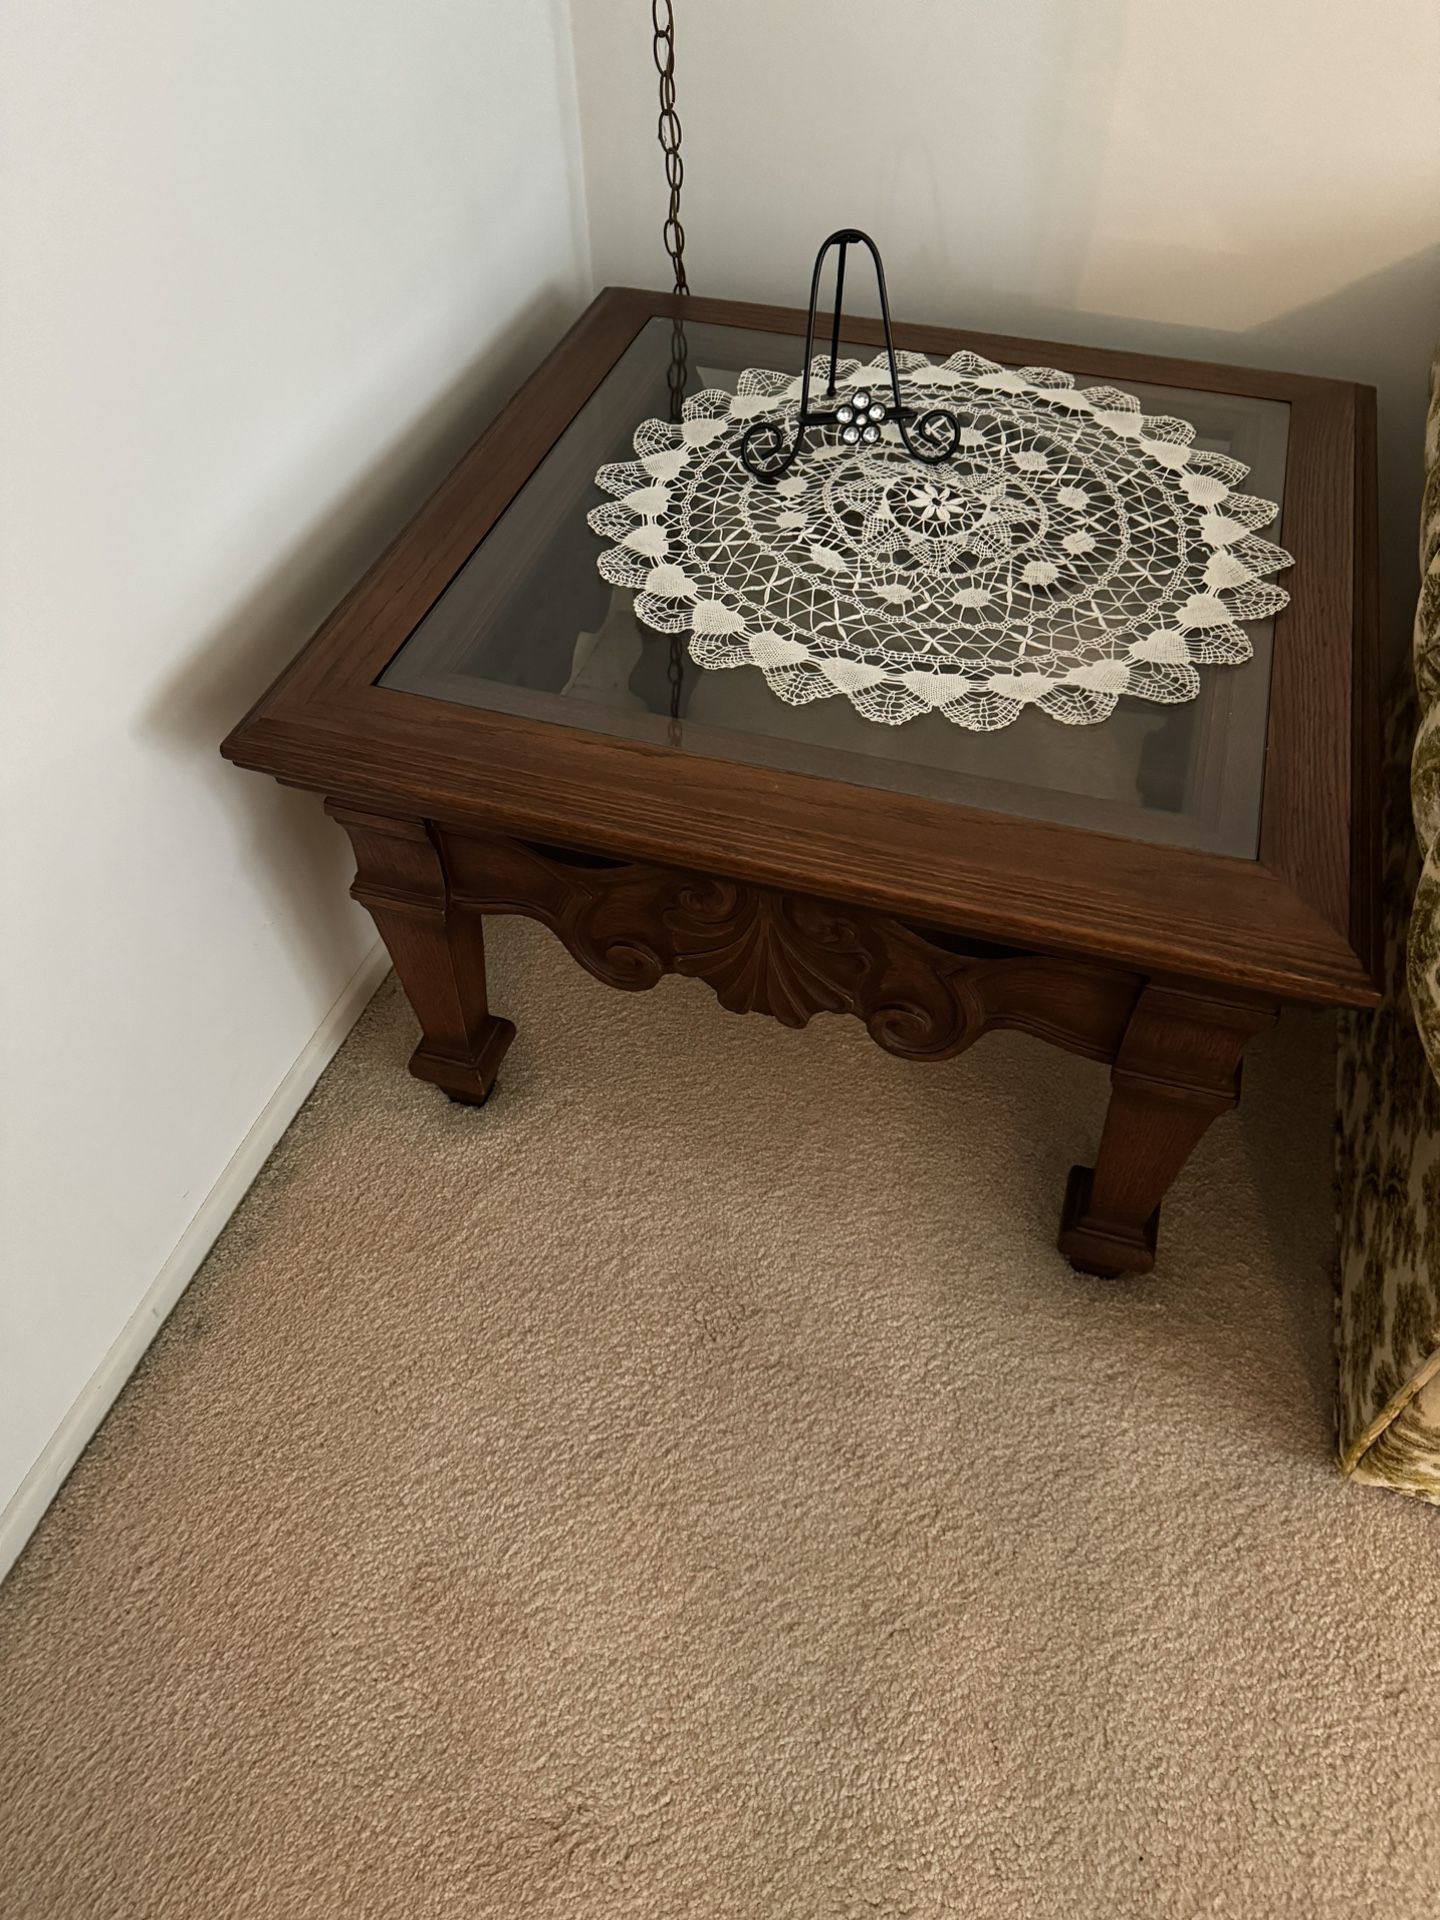 Small End Table $50 OBO